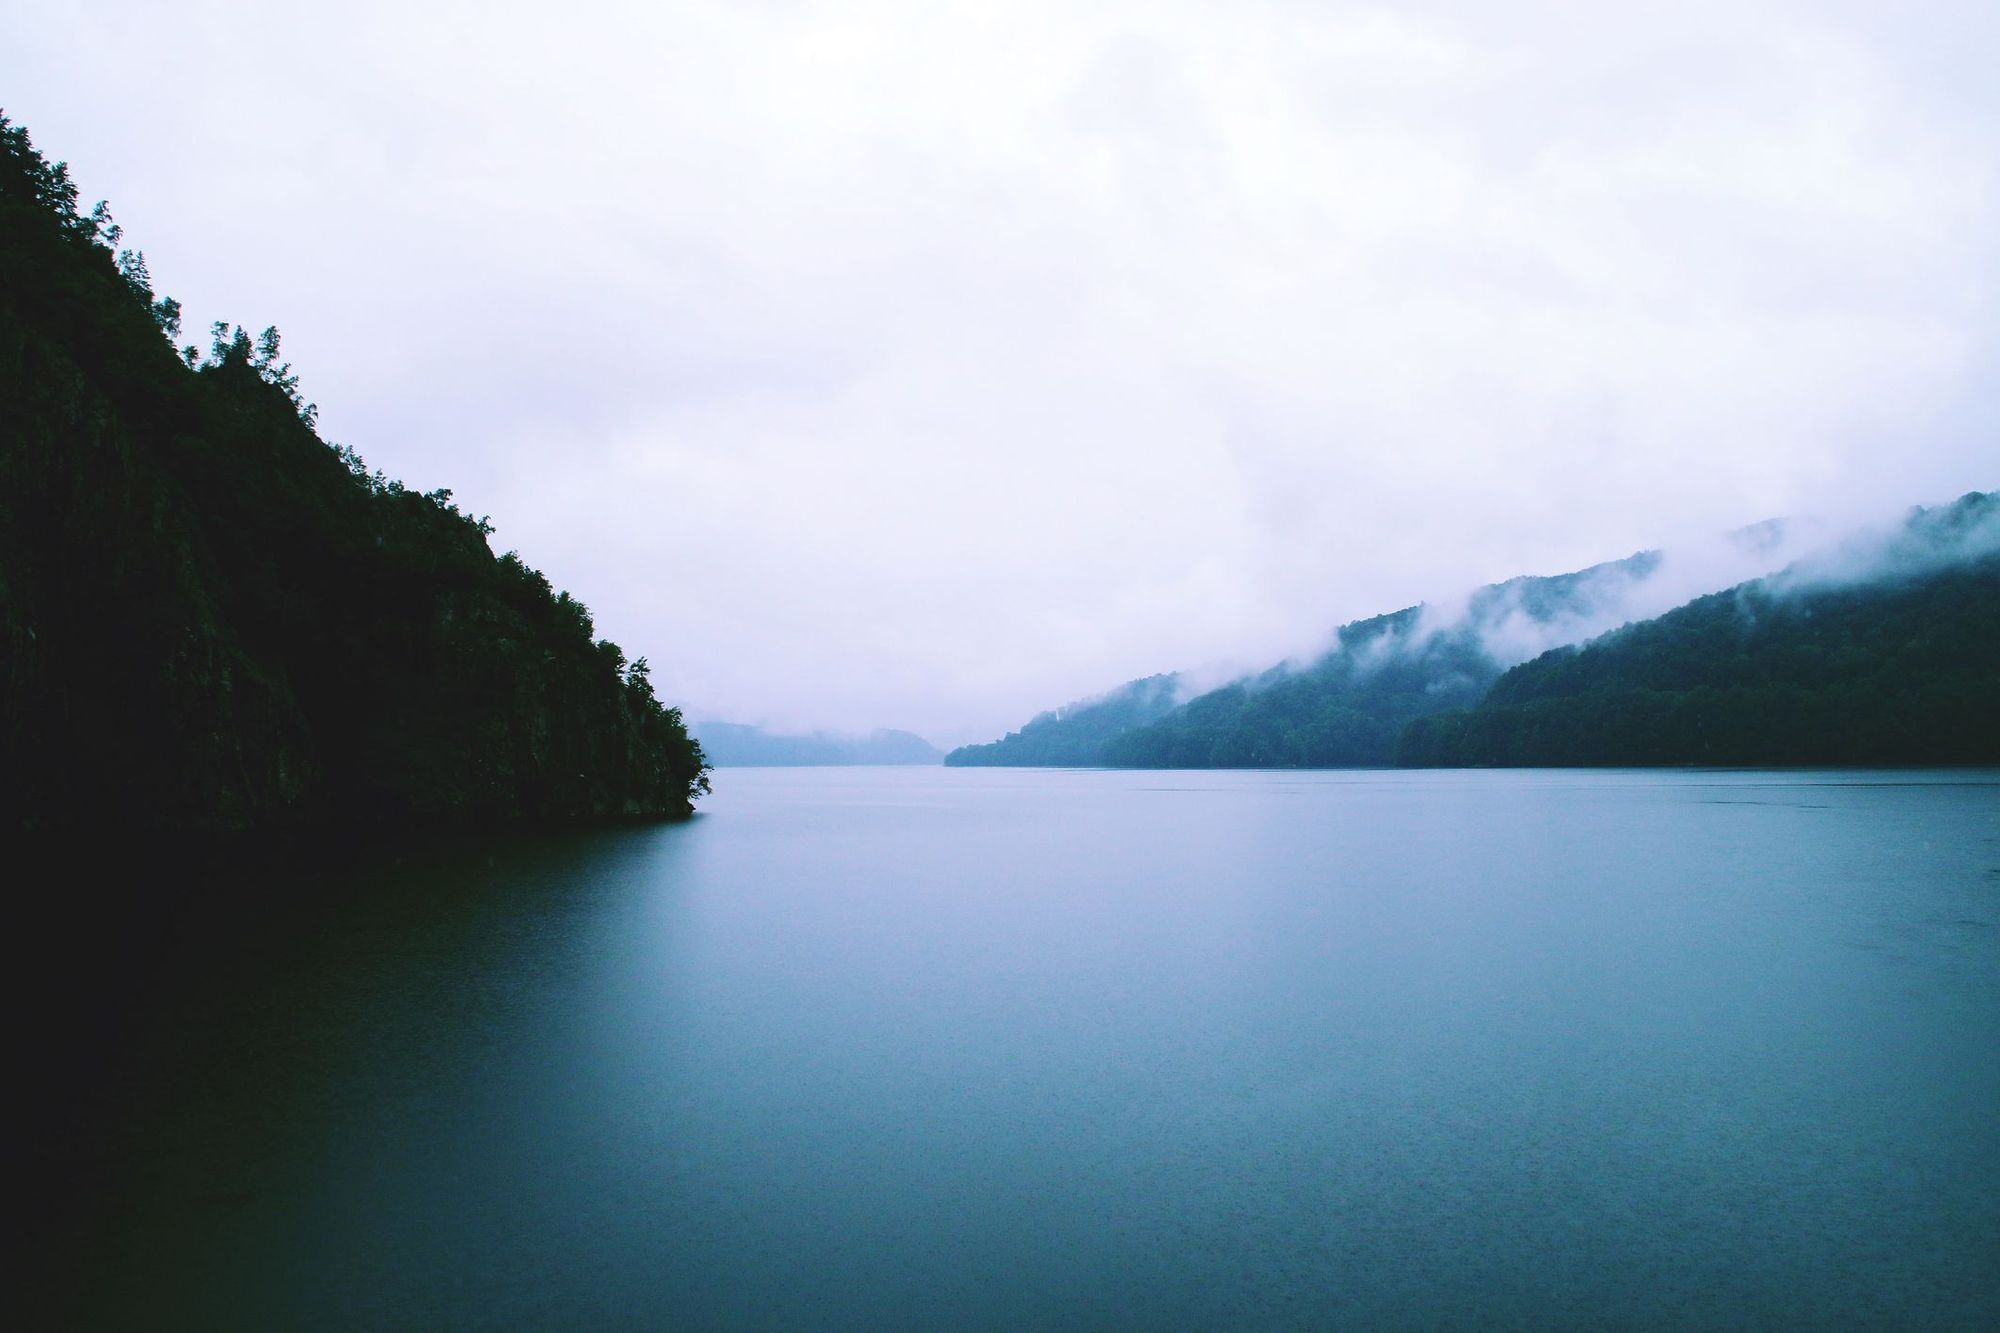 A deep lake on a cloudy day.